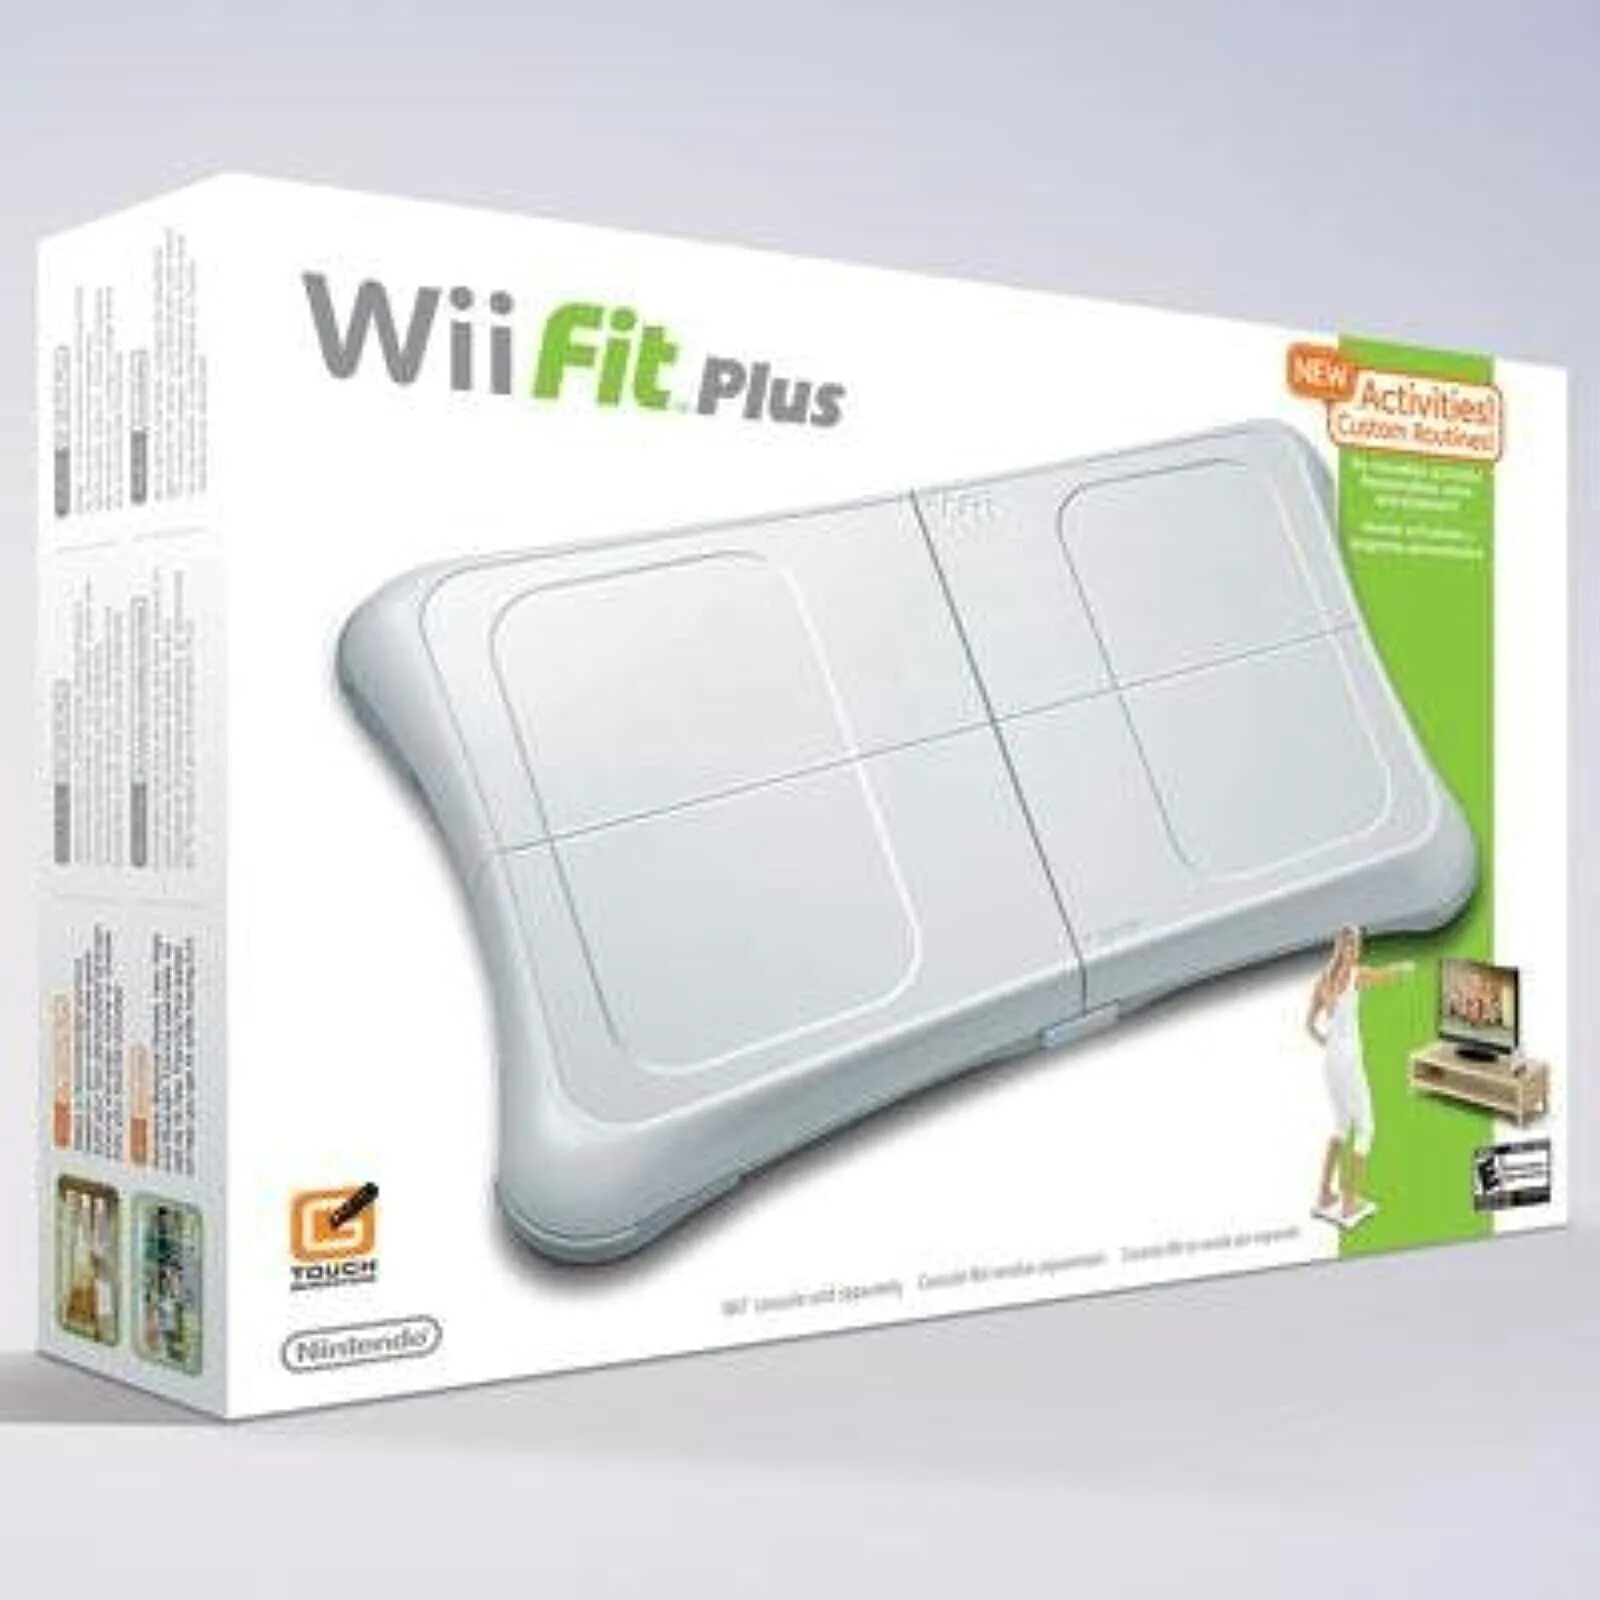 Wii fit. «Wii Balance Board» и «Wii Fit».. Balance Board консоли Nintendo Wii. Nintendo Wii Balance Board RVL-021. Wii Fit Plus.